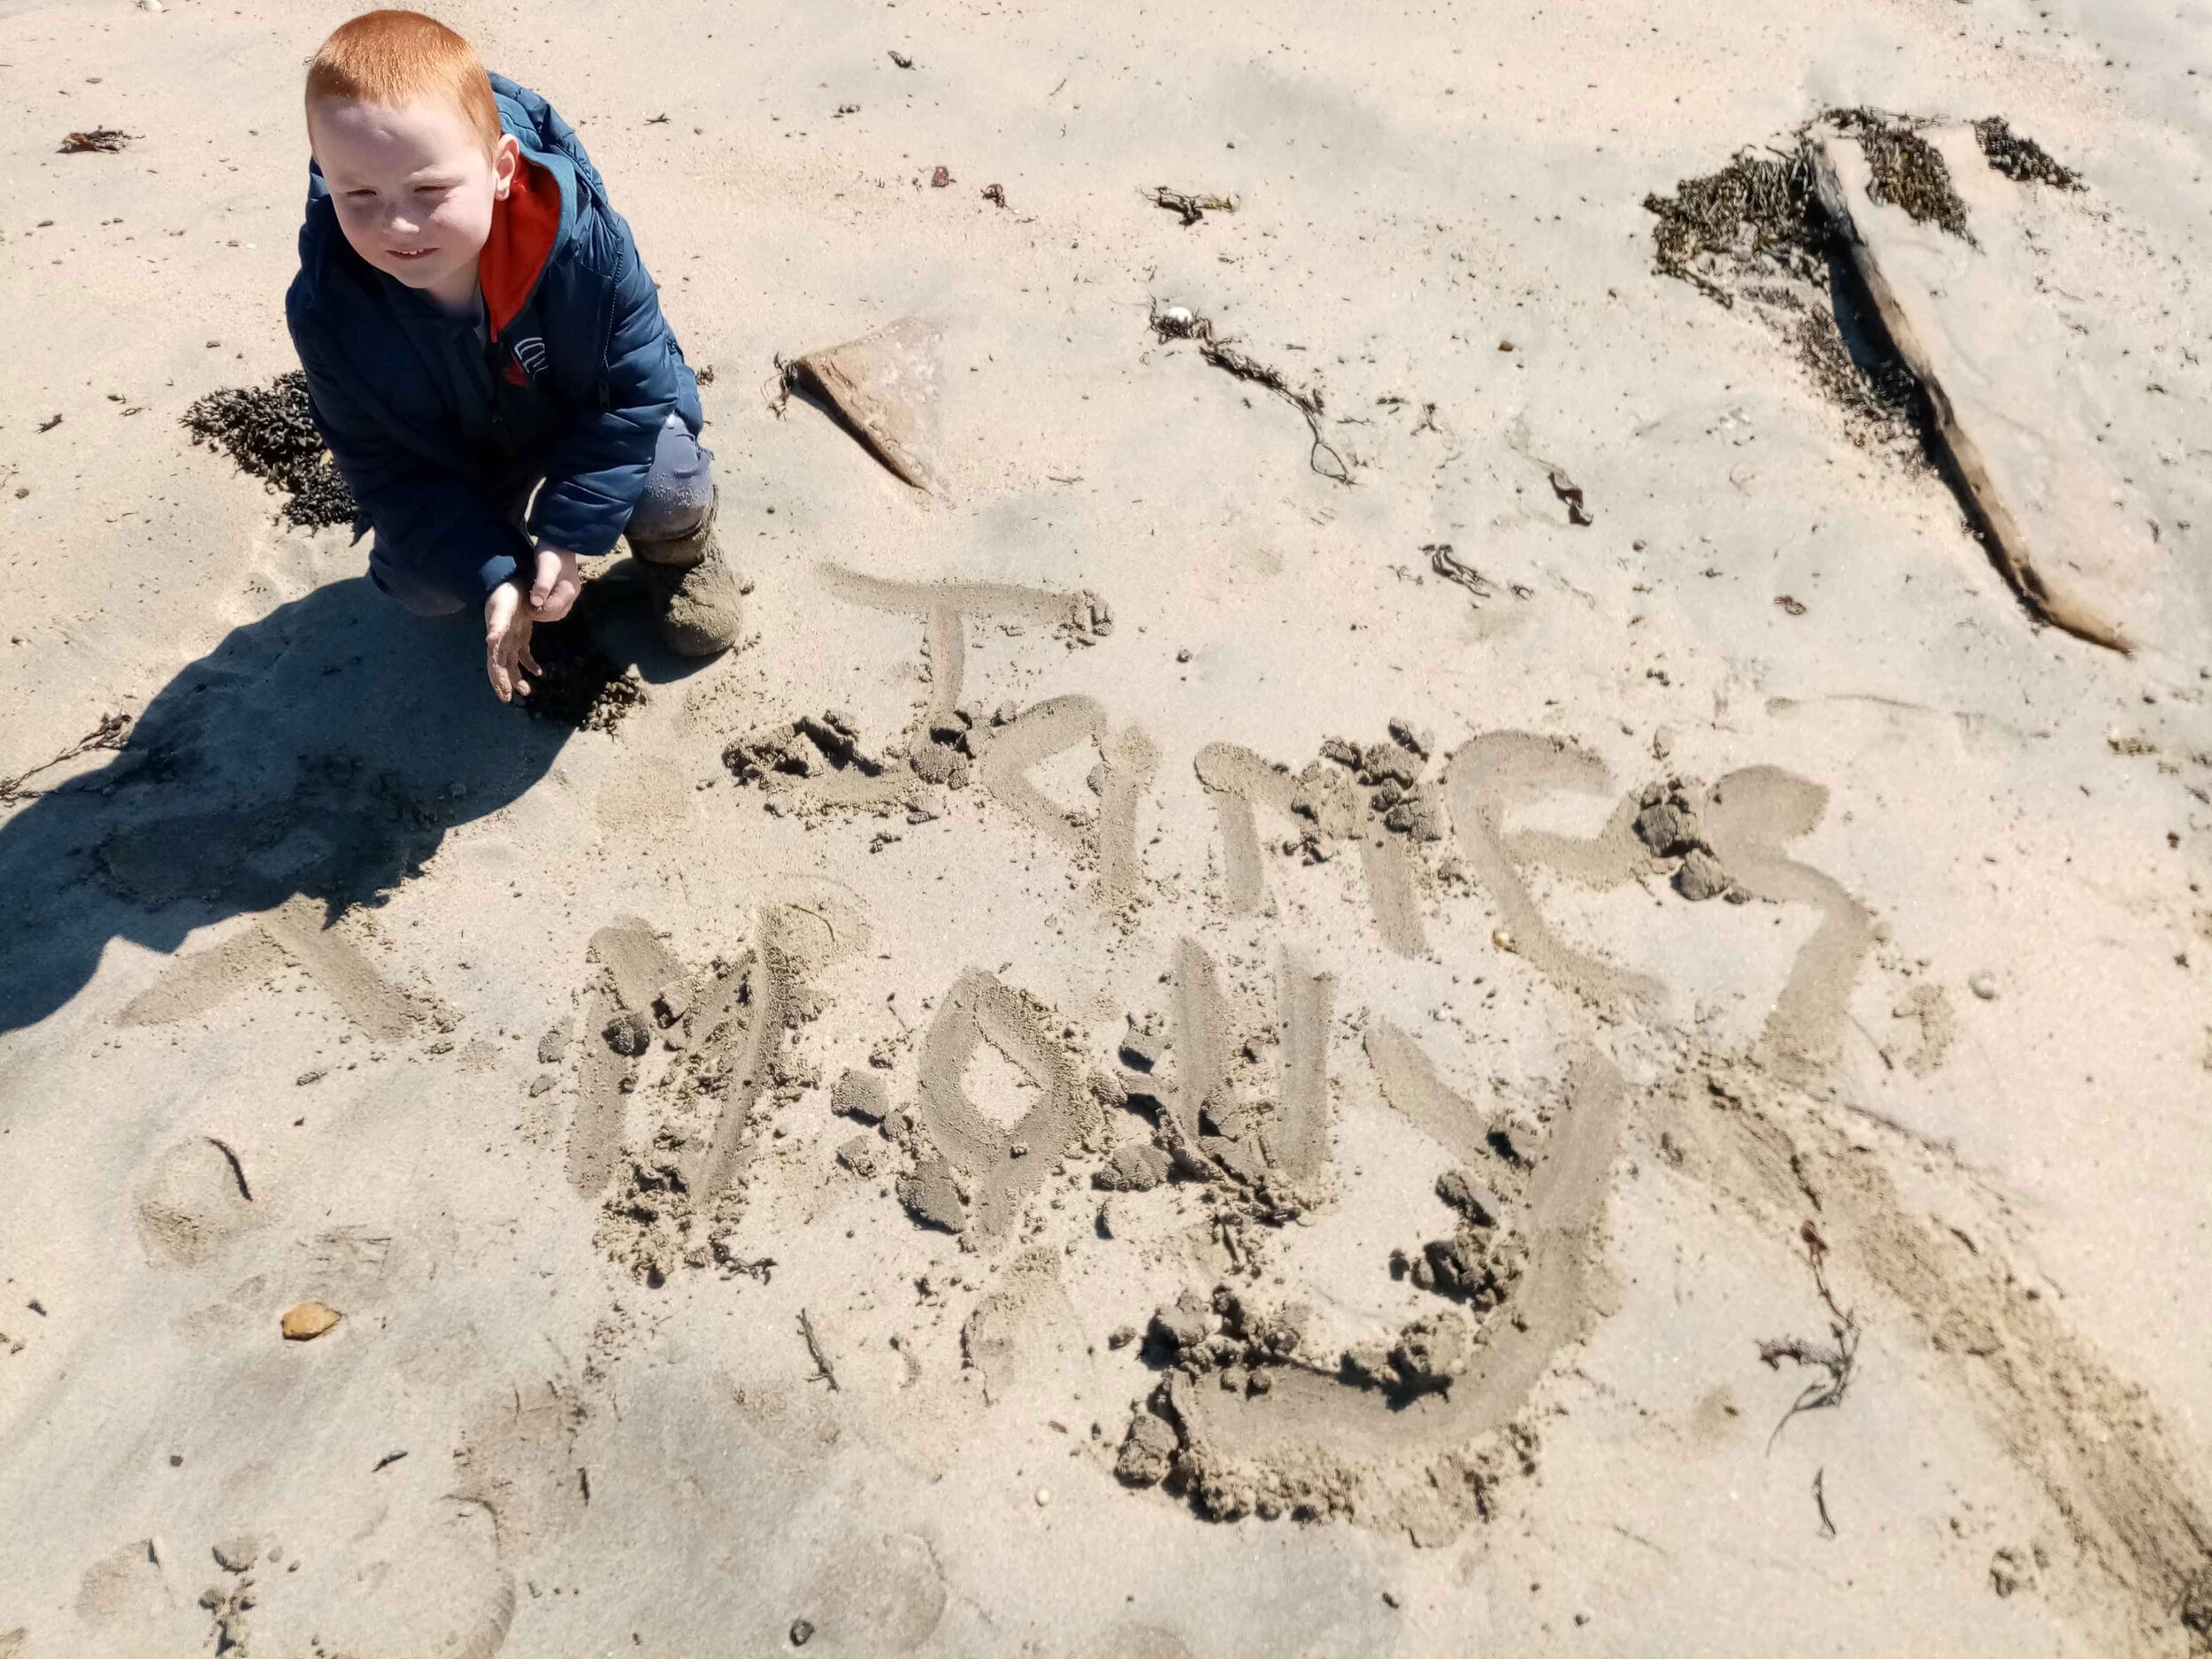 Names in the sand by James Anderson age 5